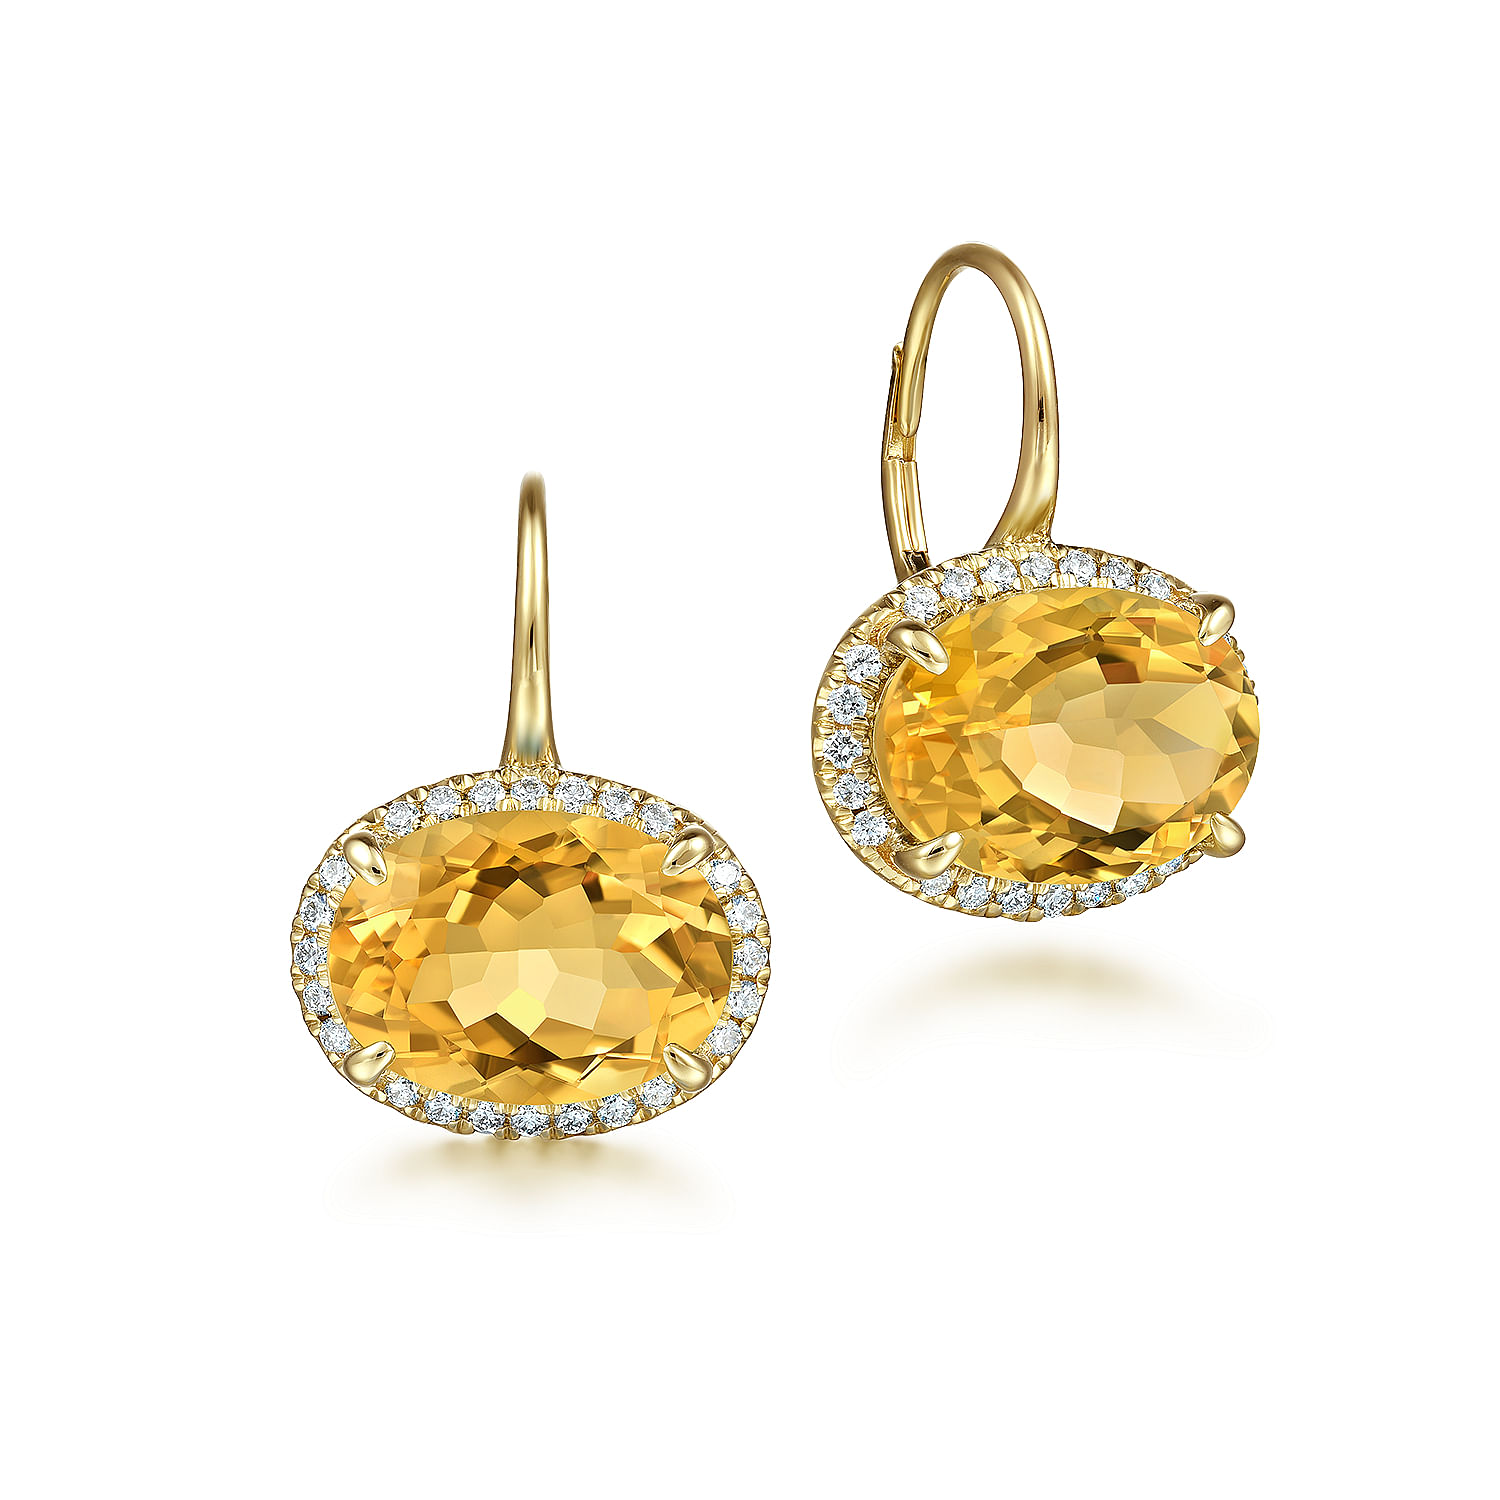 14K Yellow Gold Diamond and Citrine Oval Shape Earrings With Flower Pattern J-Back